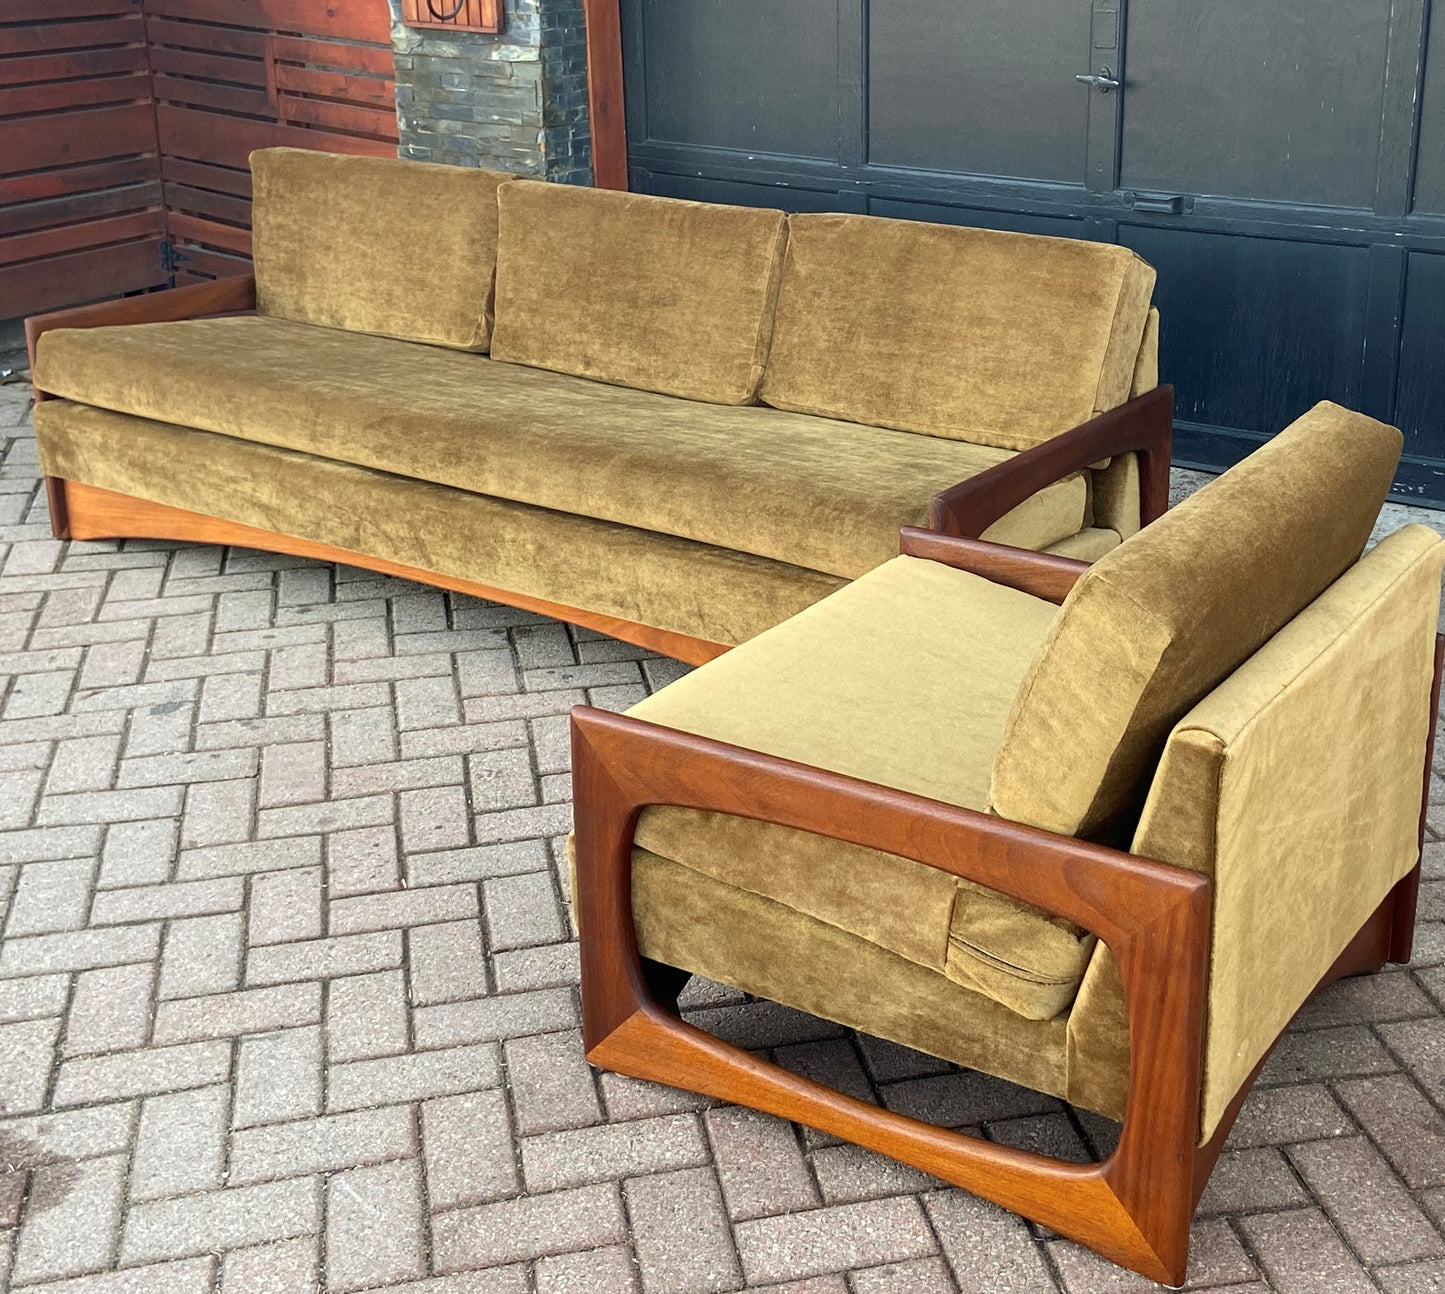 REFINISHED REUPHOLSTERED MCM Teak 4-Seater Sofa & Armchair in Wool Mohair - PERFECT